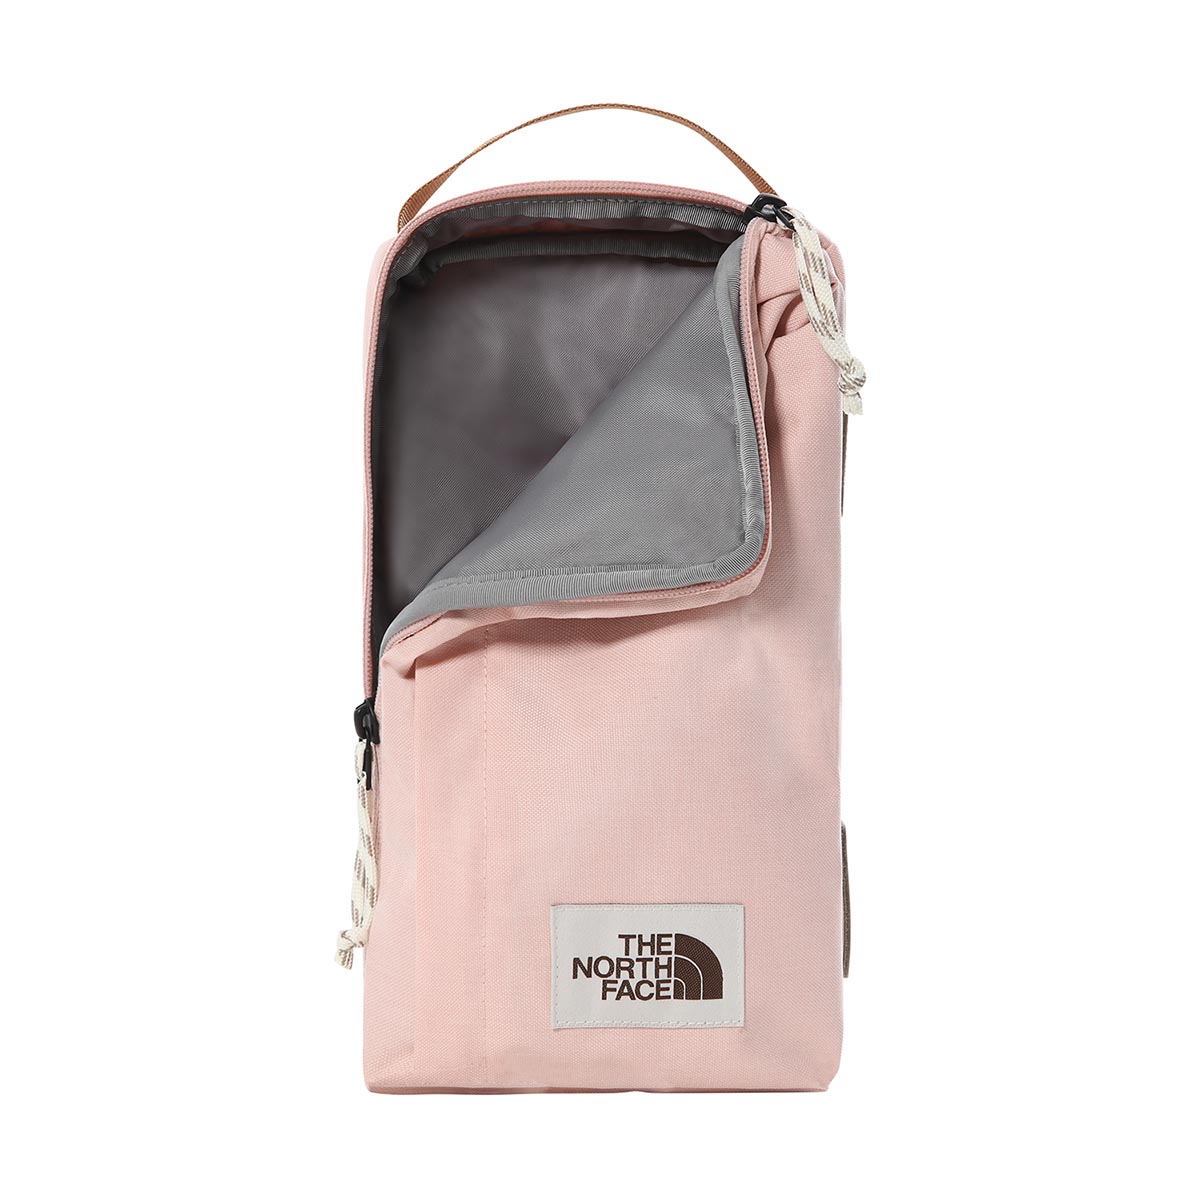 THE NORTH FACE - FIELD BAG 7 L